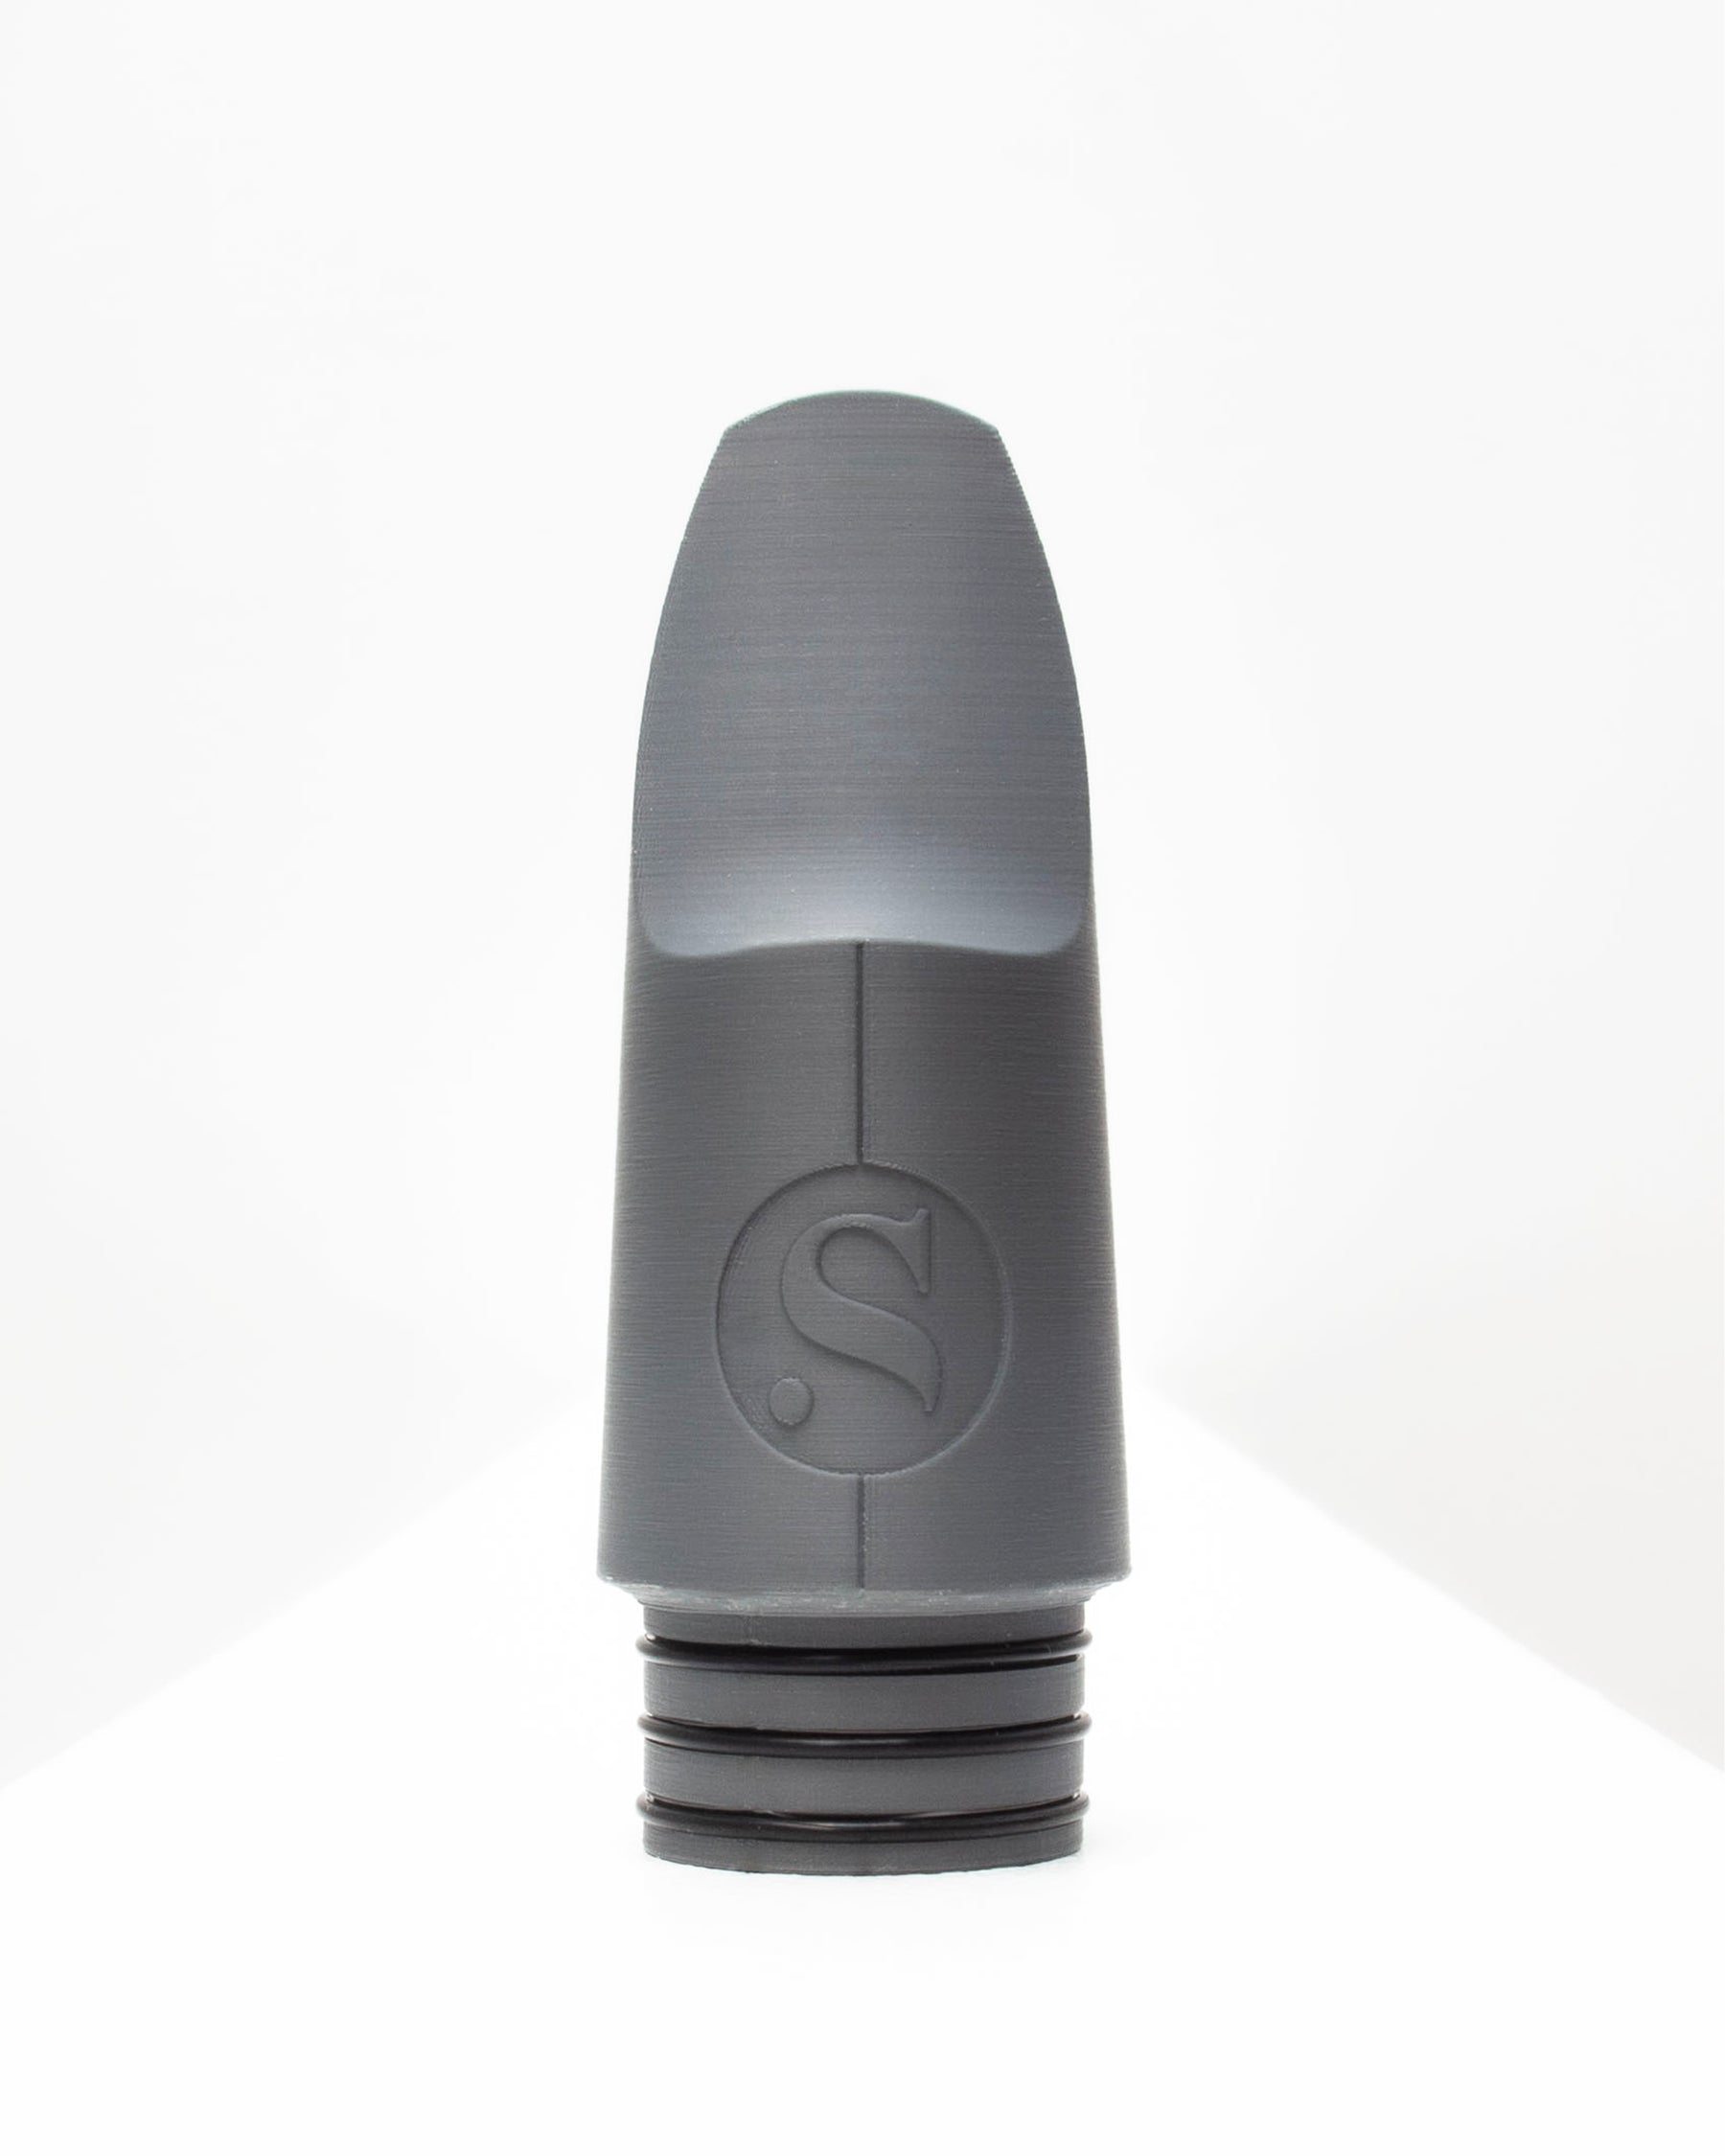 Bass Signature Clarinet mouthpiece - Shabaka Hutchings by Syos - Anthracite Metal